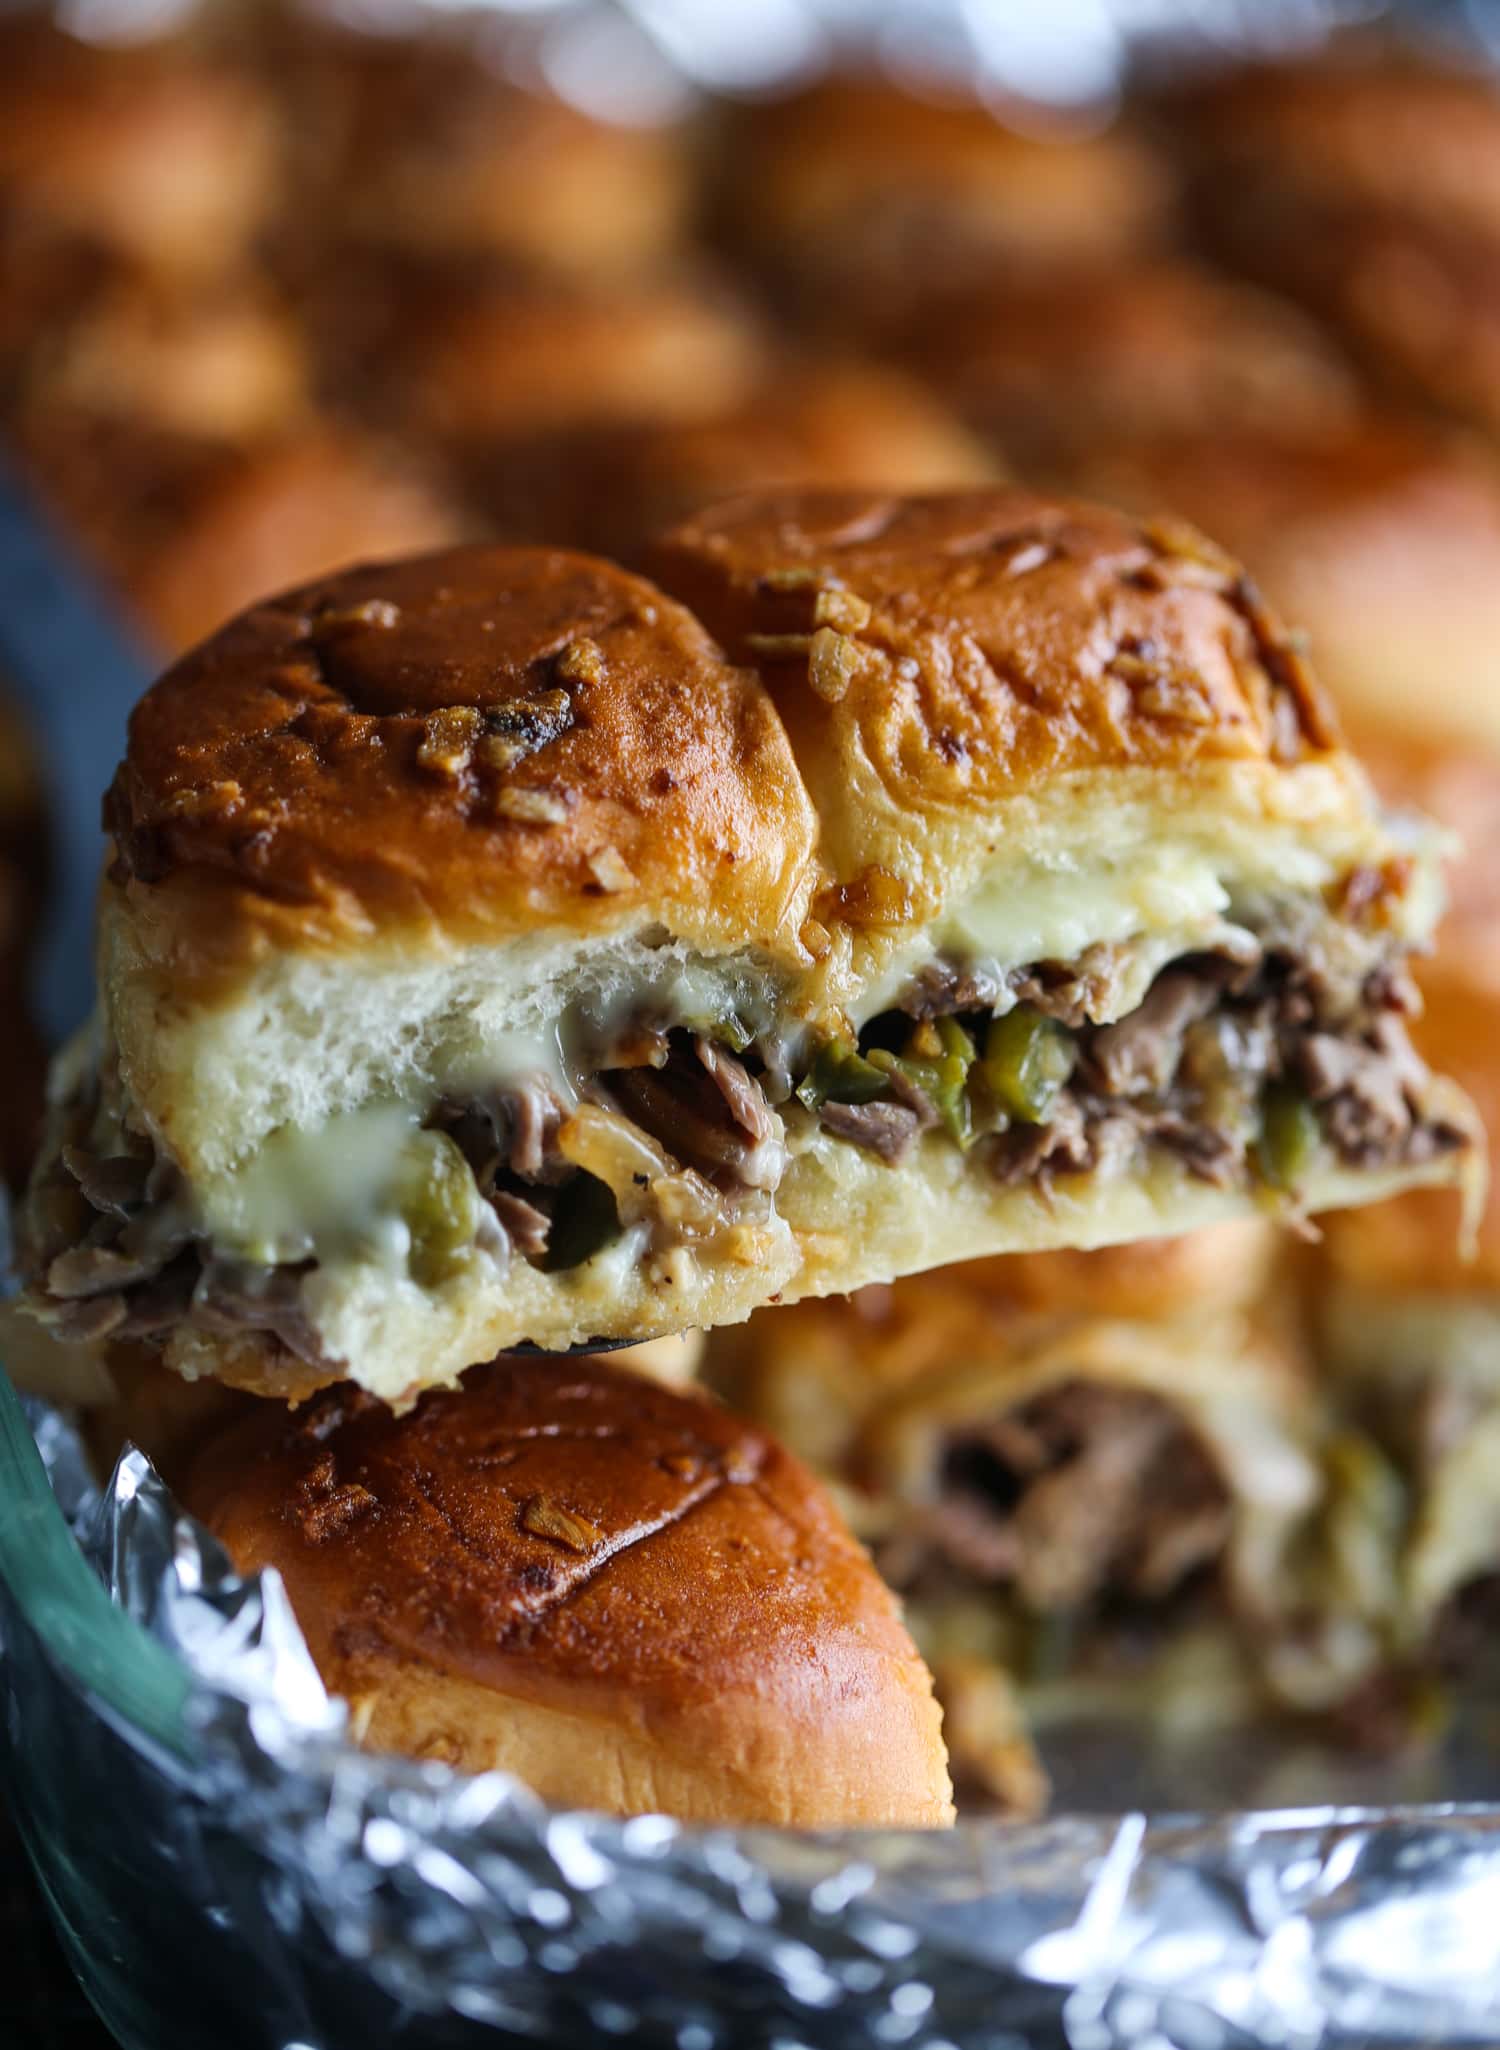 Two cheesesteak sliders are scooped from the pan.